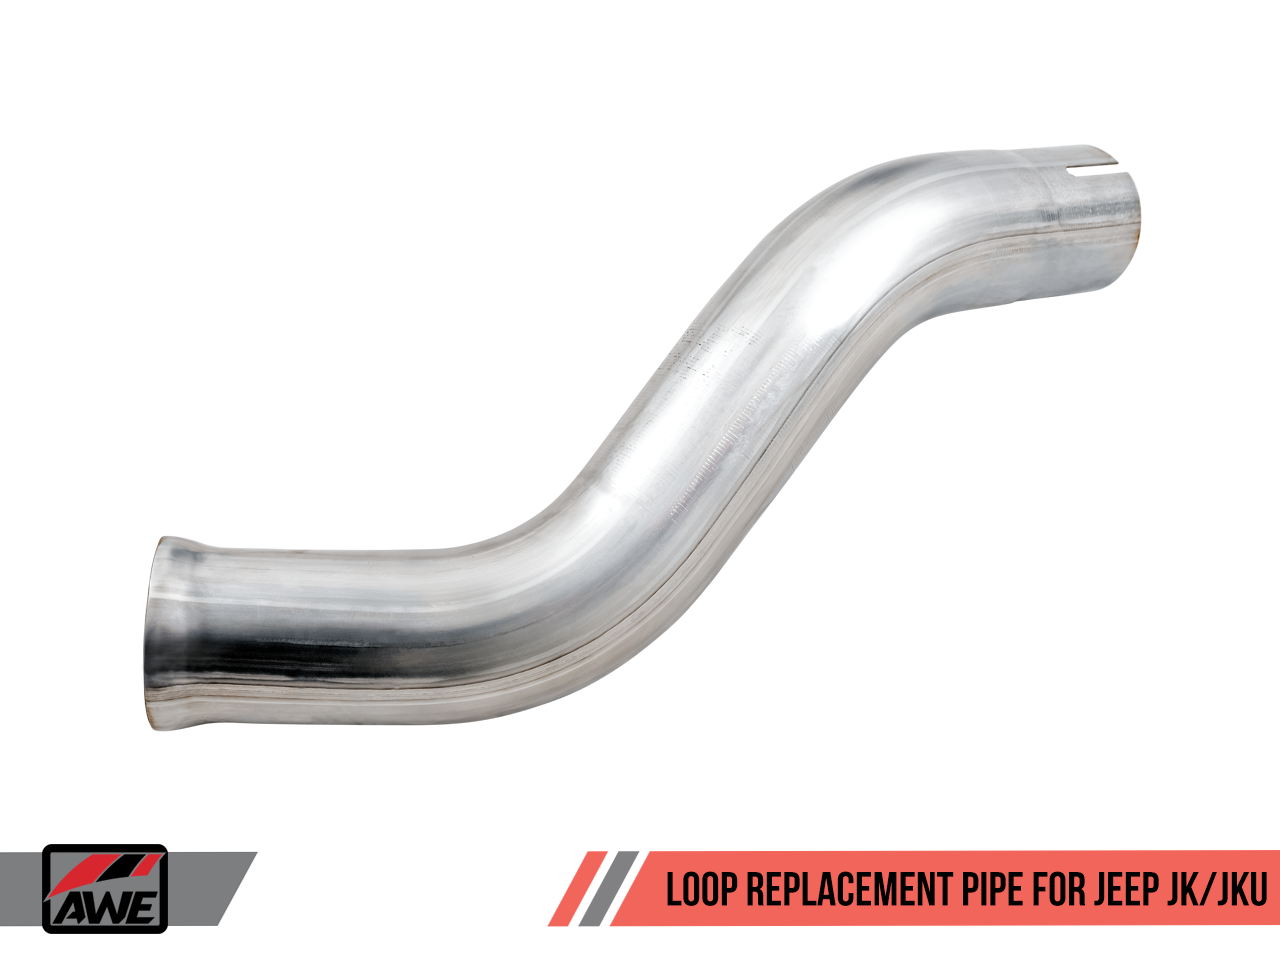 AWE Exhaust Suite for the Jeep JK/JKU Wrangler